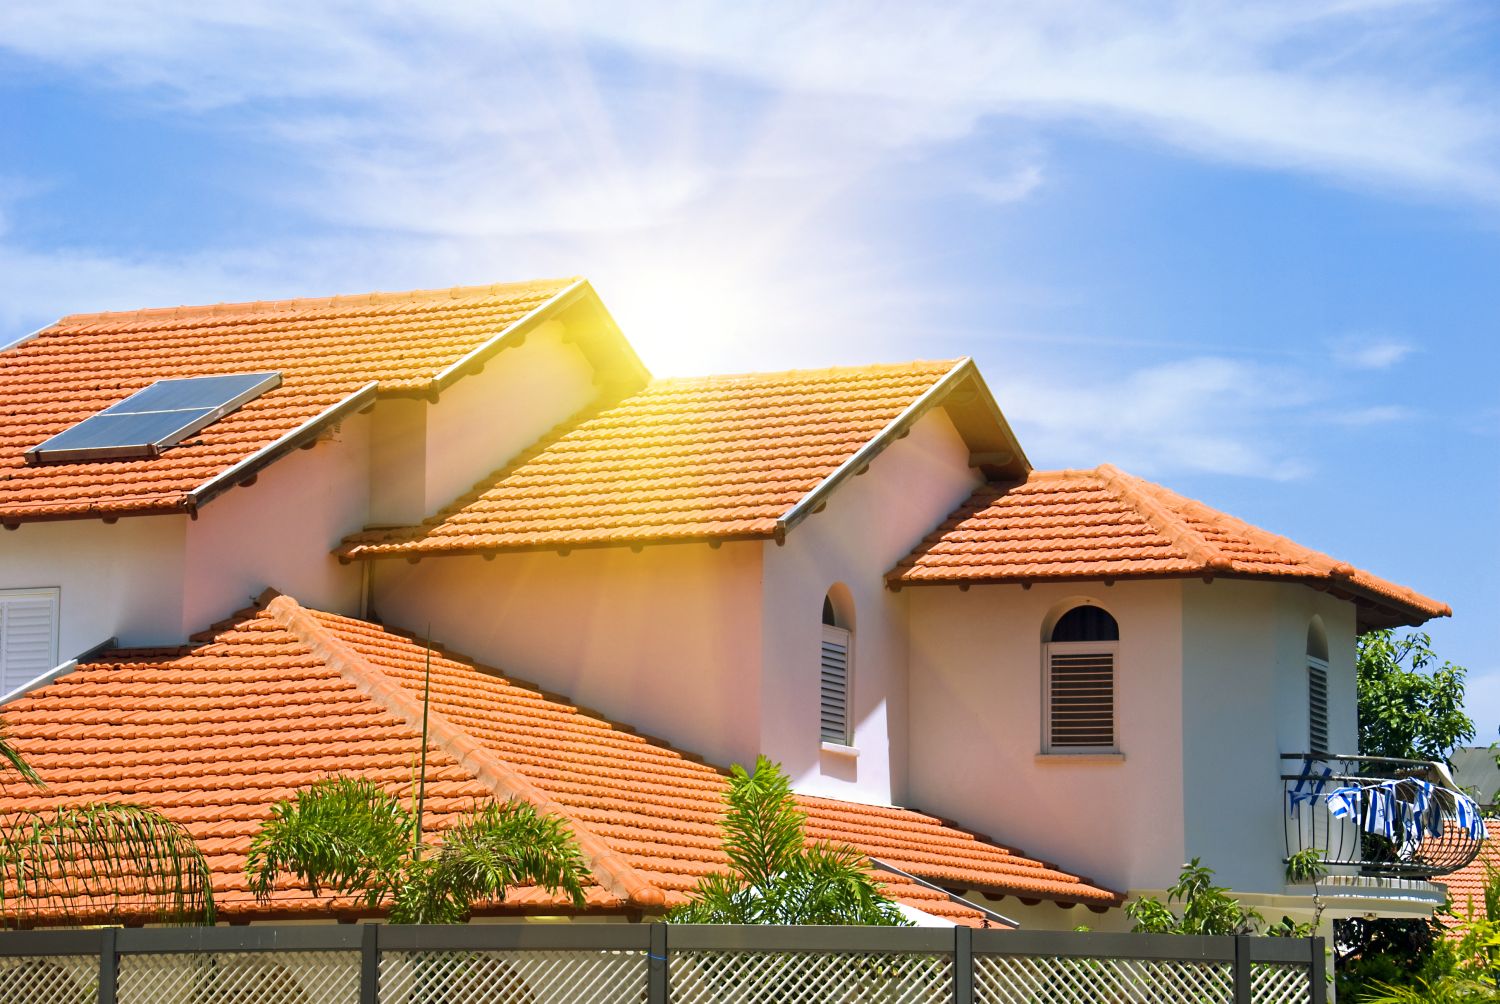 5 Tips on How to Keep Roof Cool in Summer